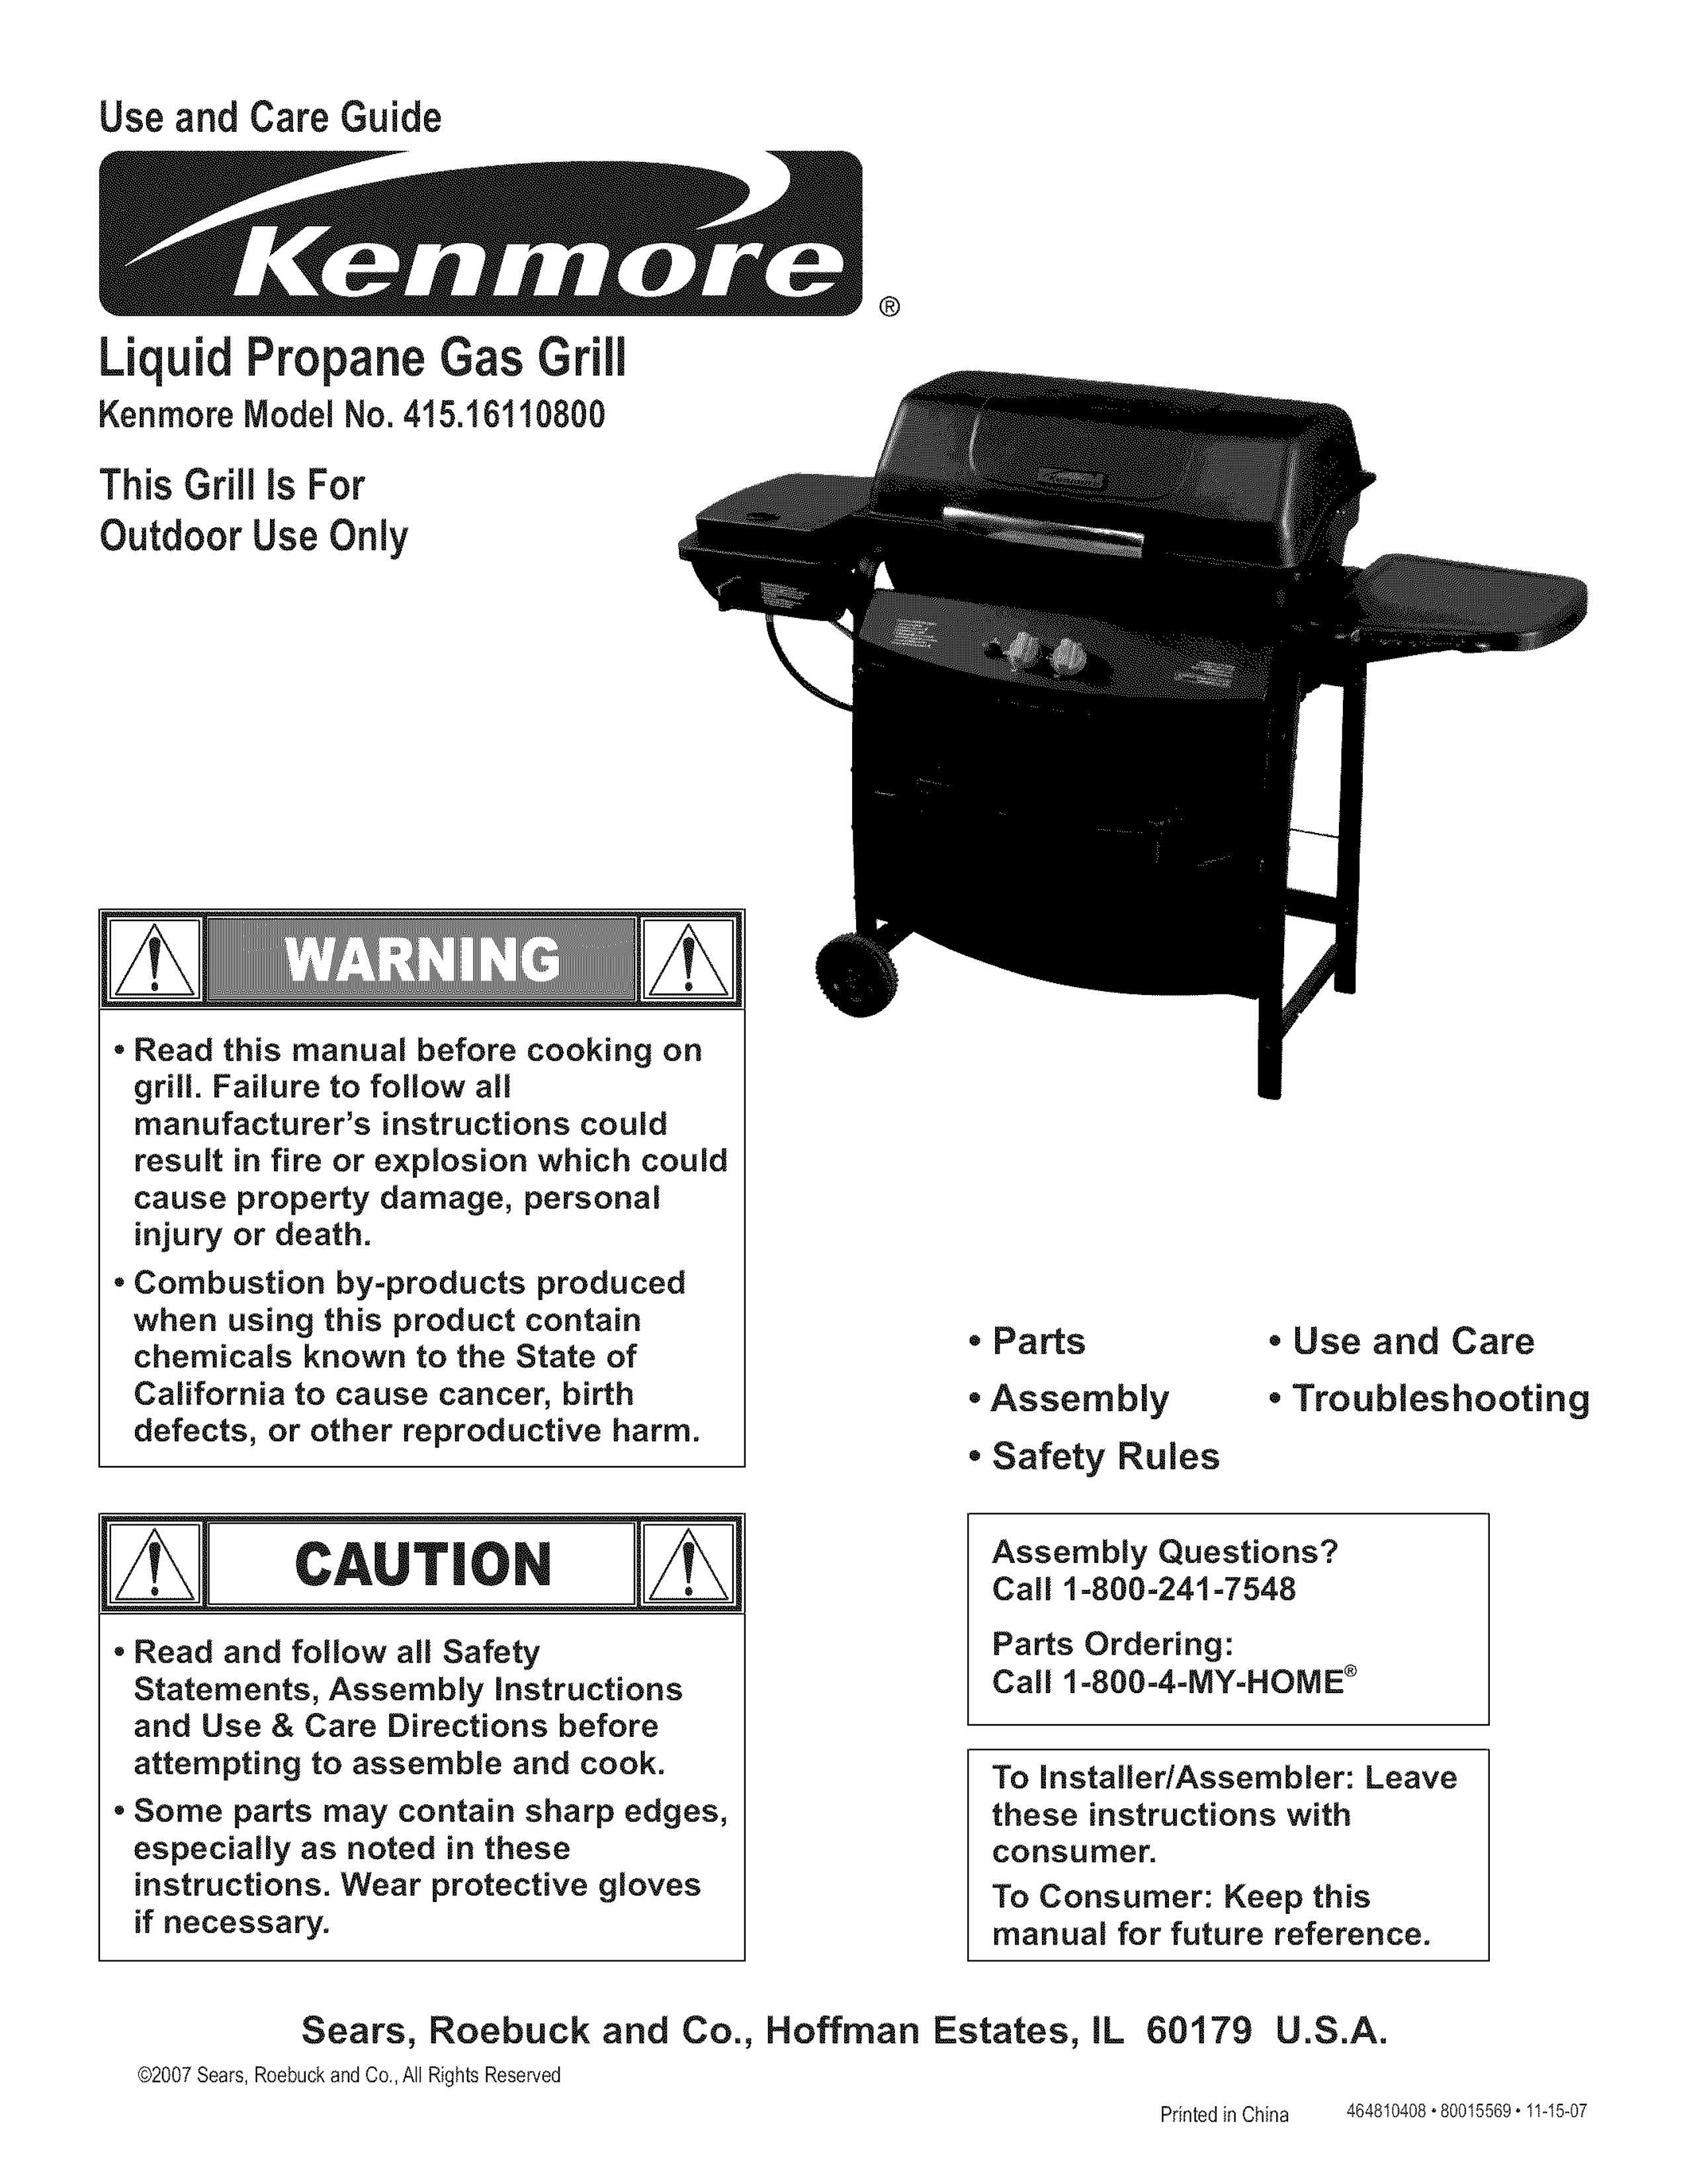 Kenmore 415.161108 Gas Grill User Manual